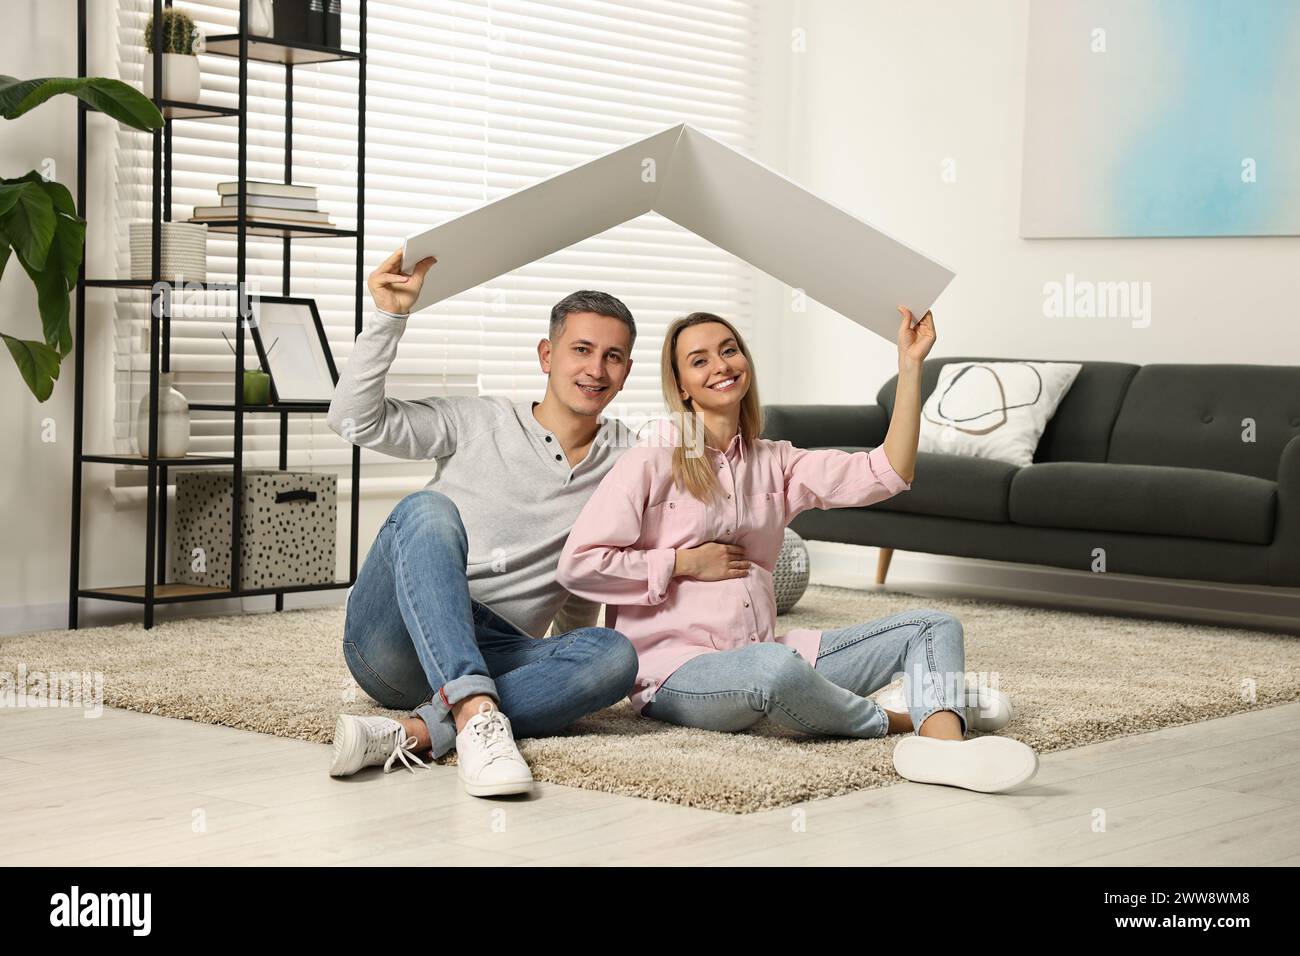 Young family housing concept. Pregnant woman with her husband sitting under cardboard roof on floor at home Stock Photo